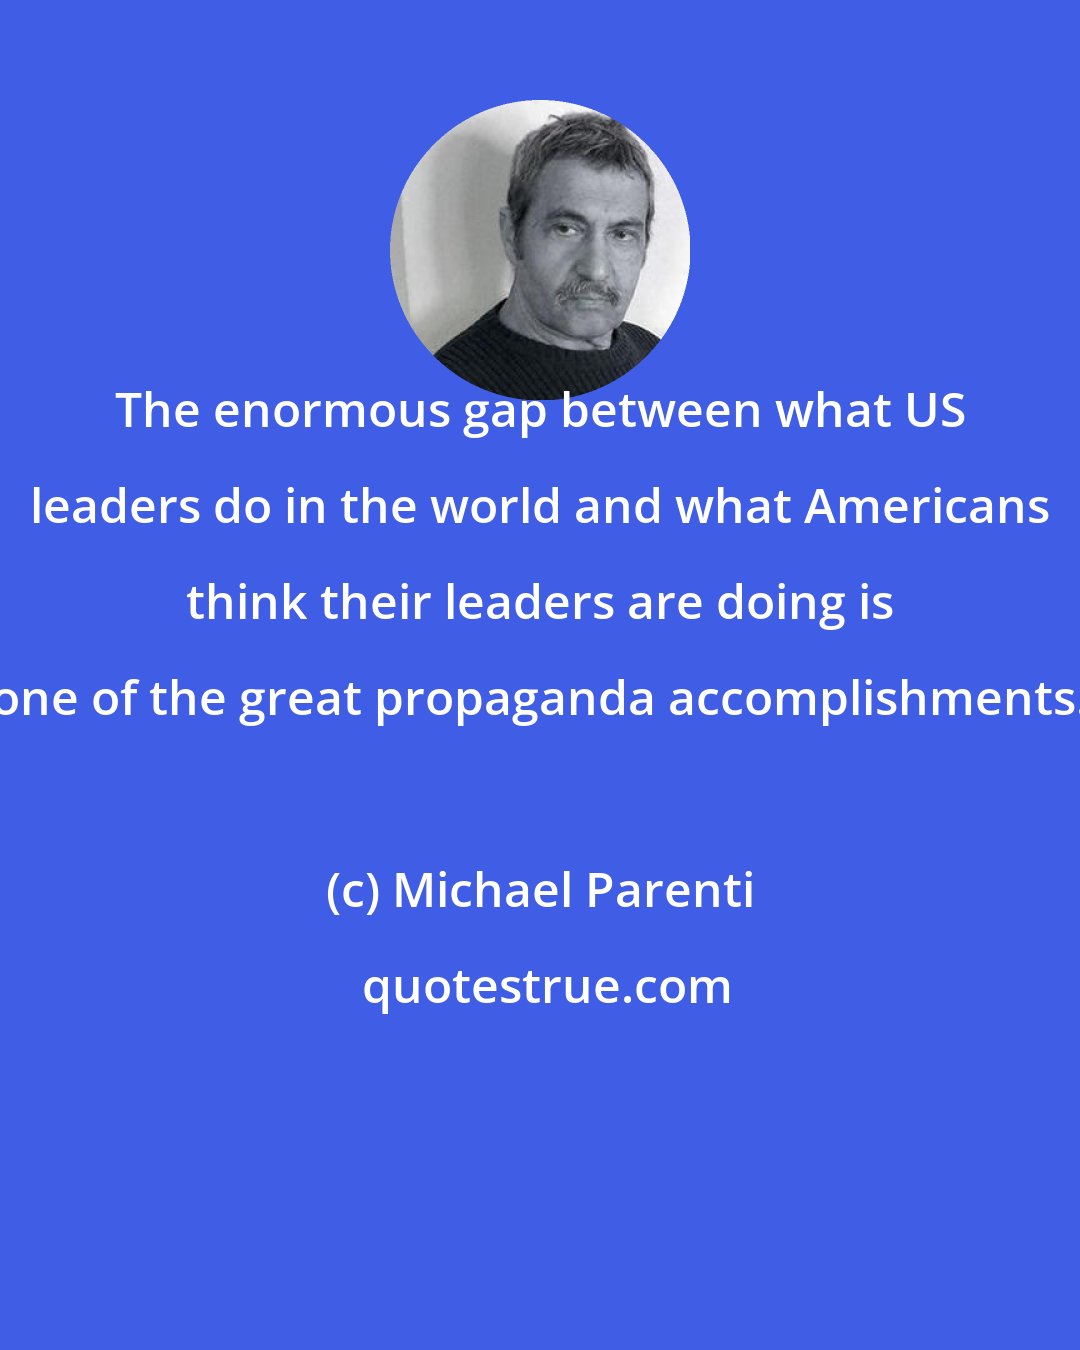 Michael Parenti: The enormous gap between what US leaders do in the world and what Americans think their leaders are doing is one of the great propaganda accomplishments.